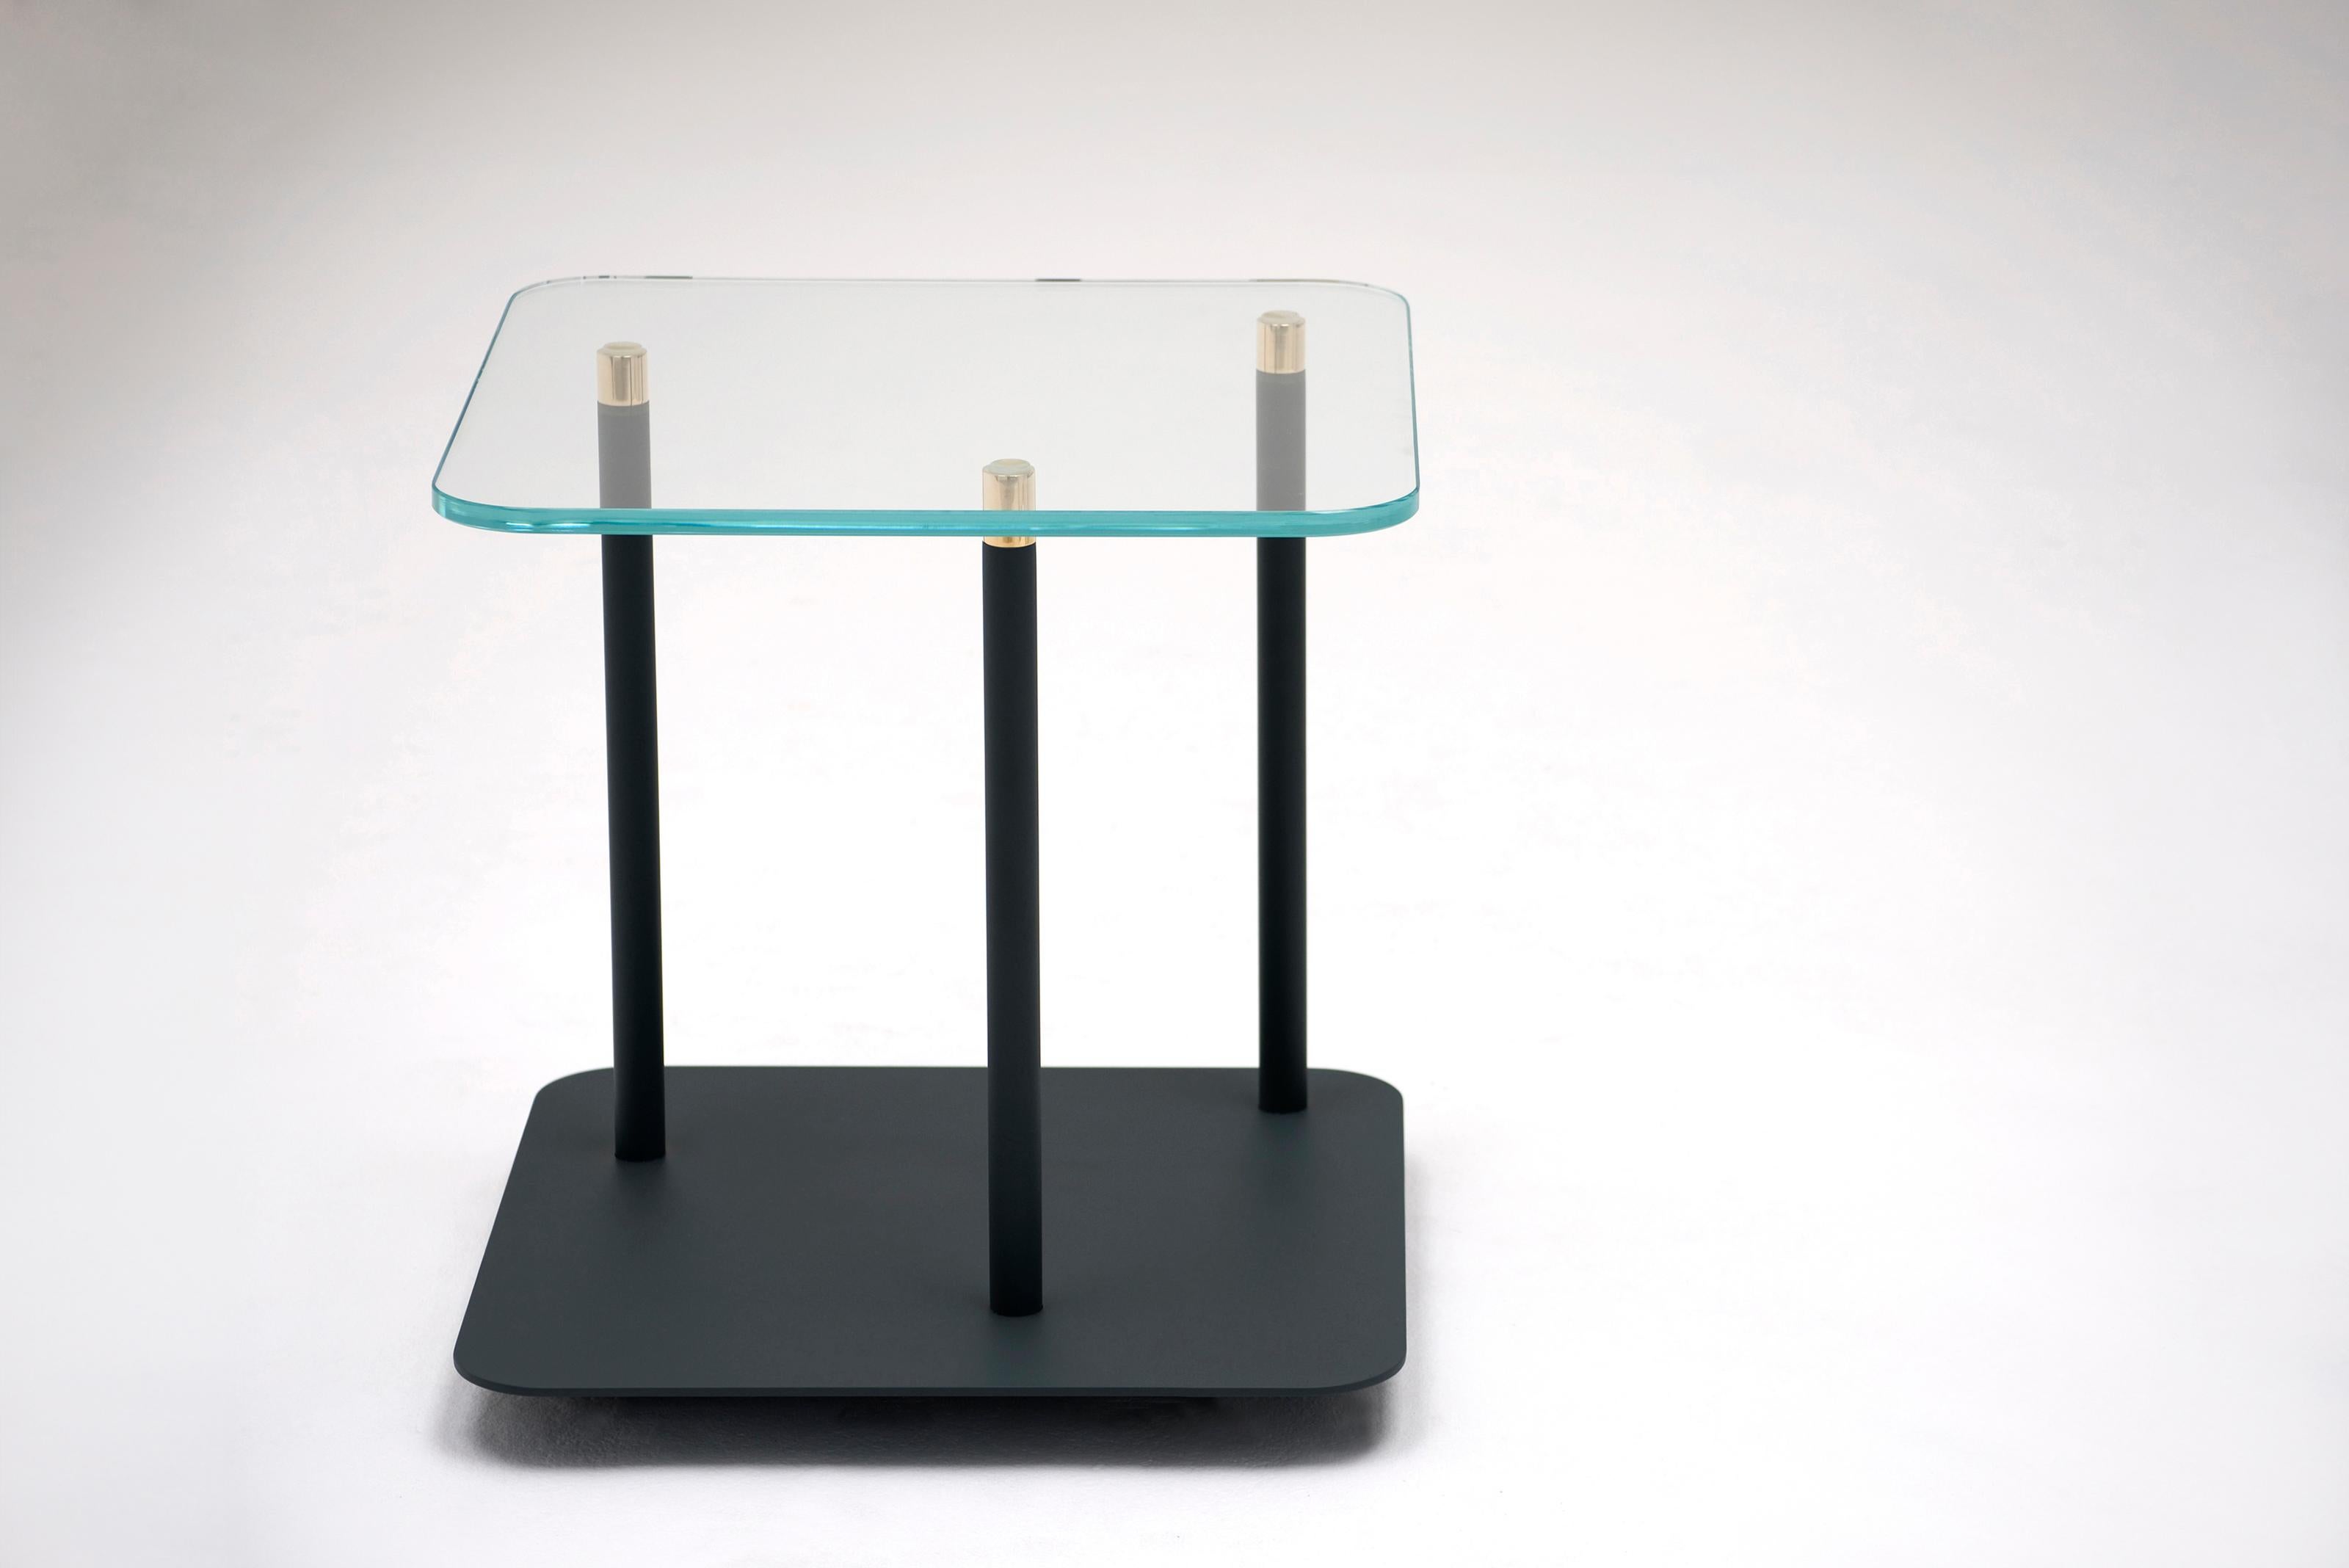 Points of Interest Side Table by Phase Design
Dimensions: D 45.7 x W 45.7 x H 44.5 cm. 
Materials: Powder-coated steel, glass and brass.

Powder coated steel base with solid brass tips and available with starphire glass top. Powder coat finishes